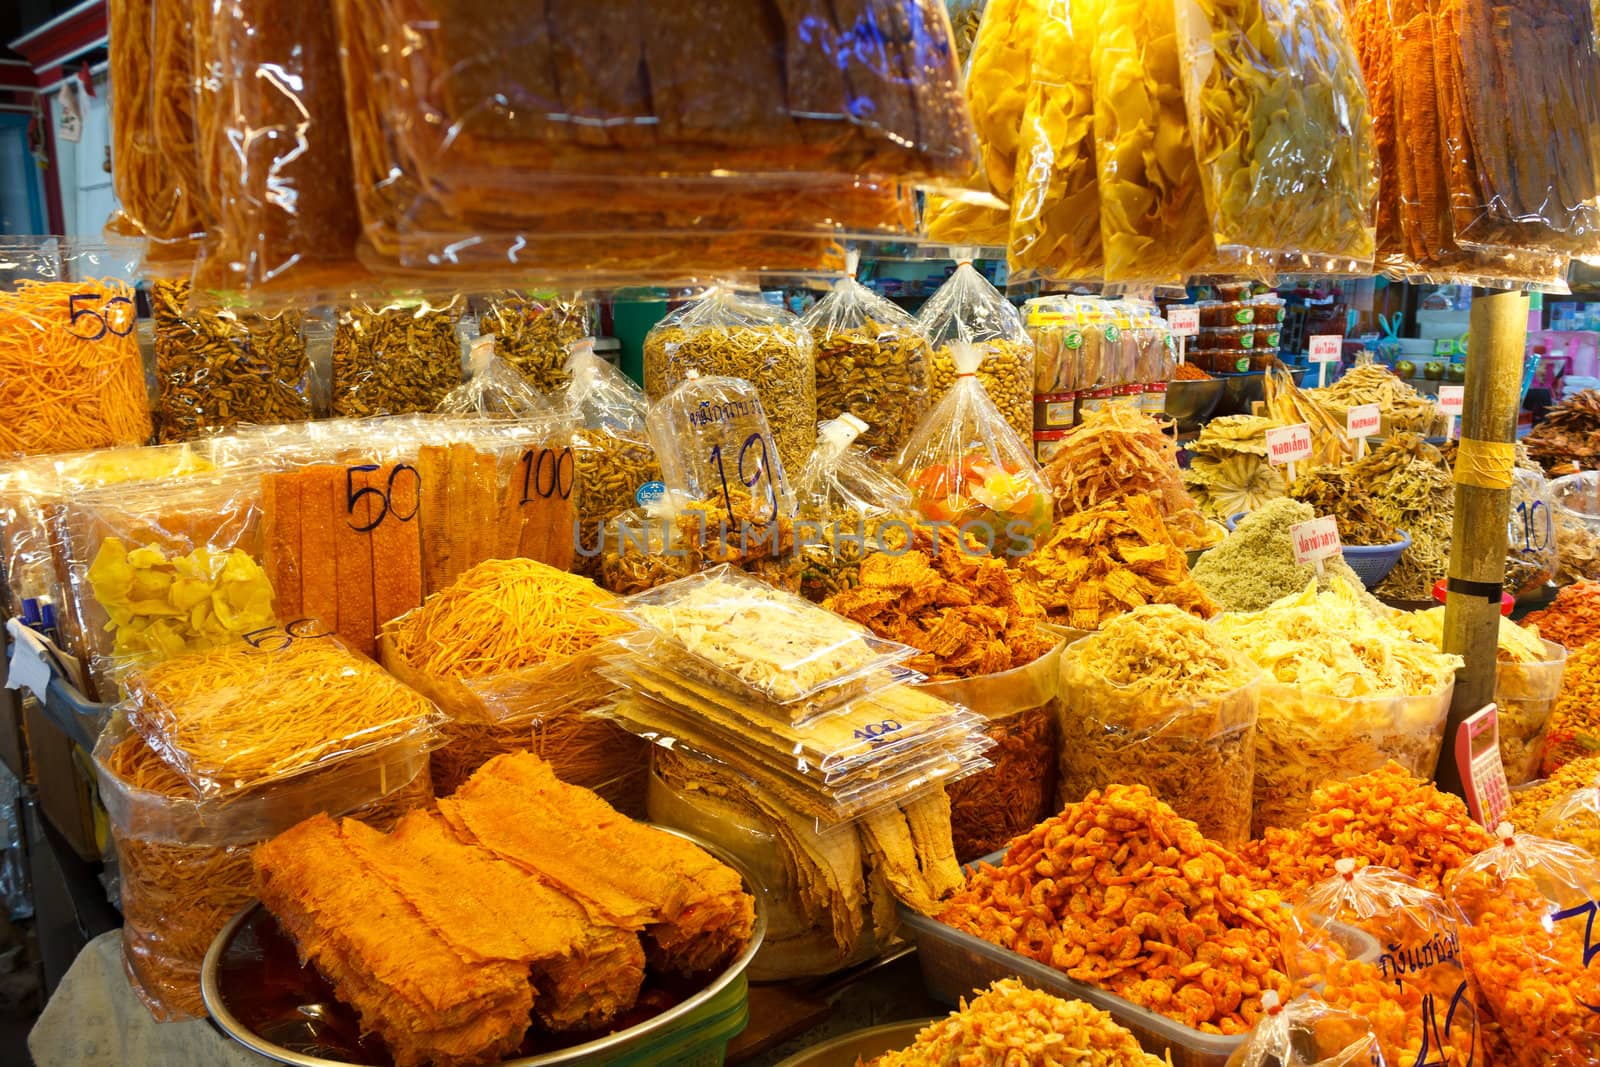 Dried foodstuff, squids and other seafood, sale at market in Thailand.